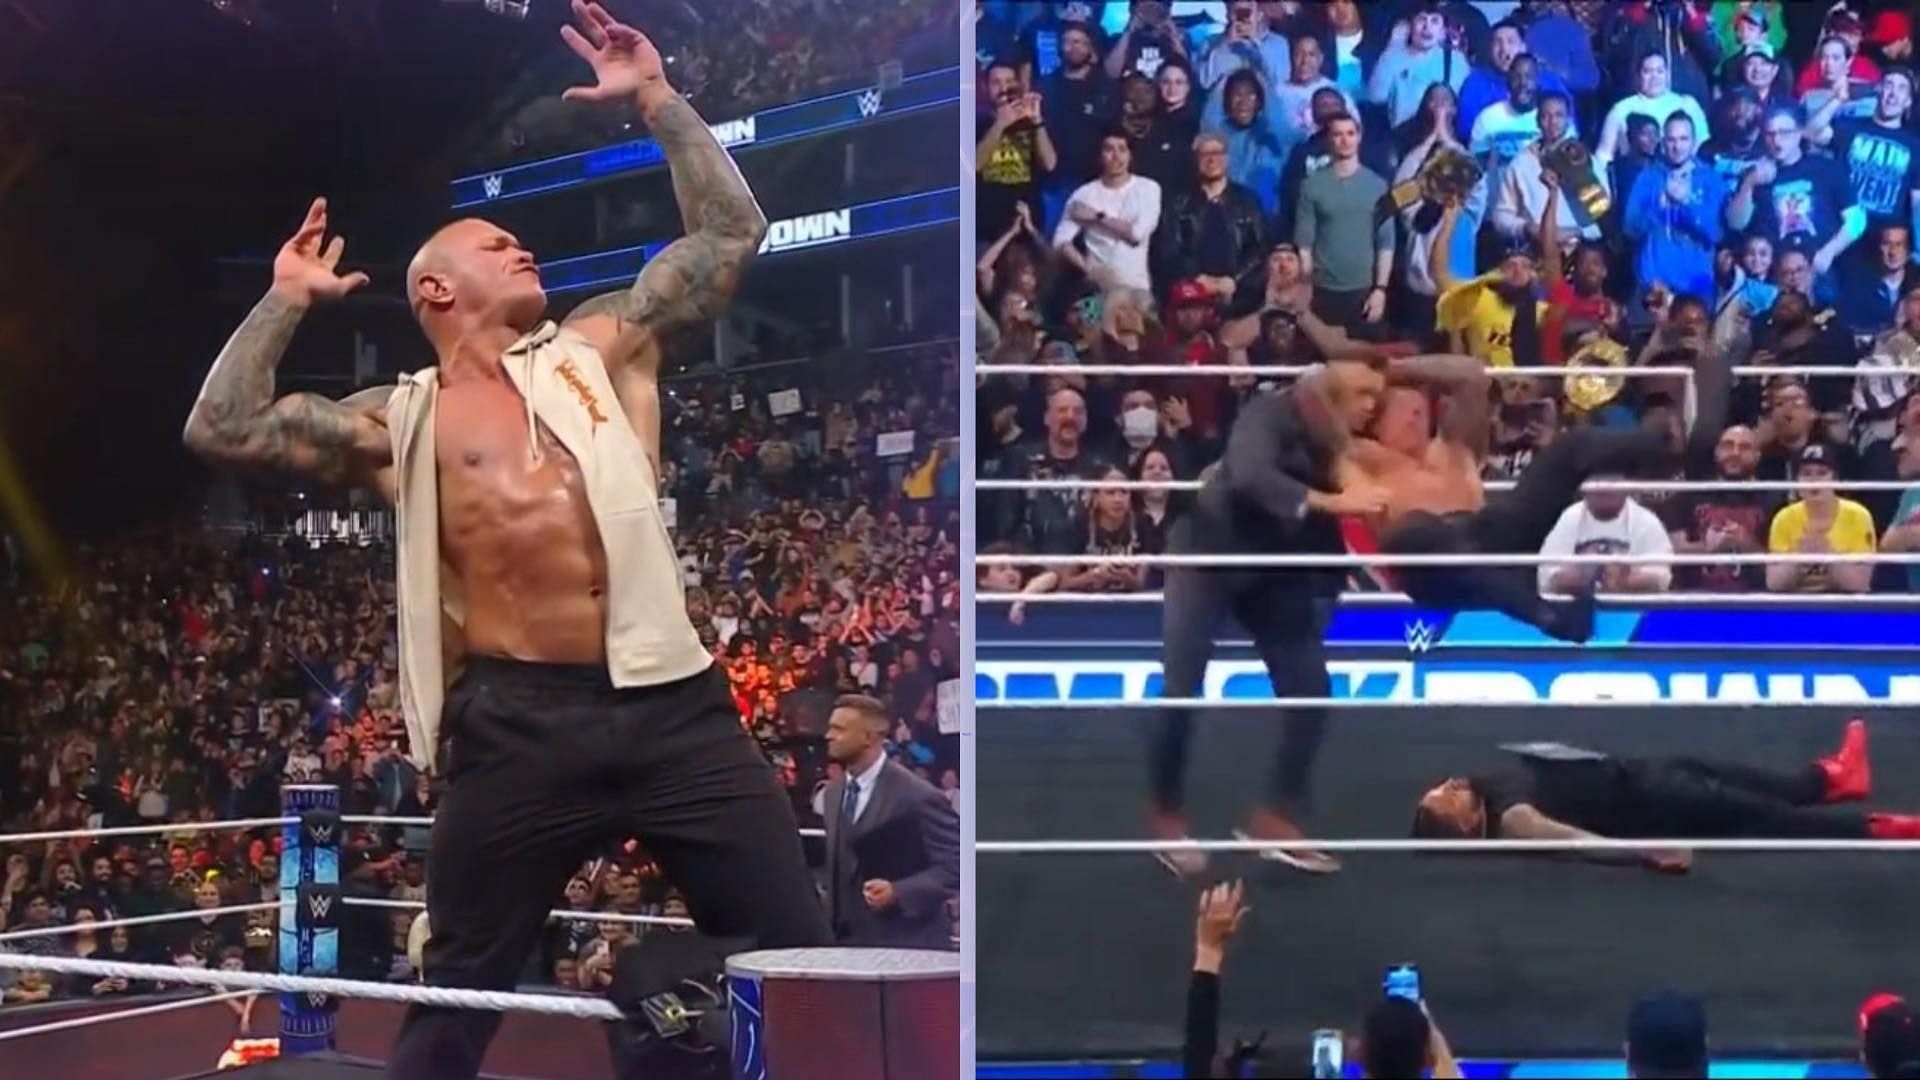 Randy Orton shocked the WWE Universe on SmackDown